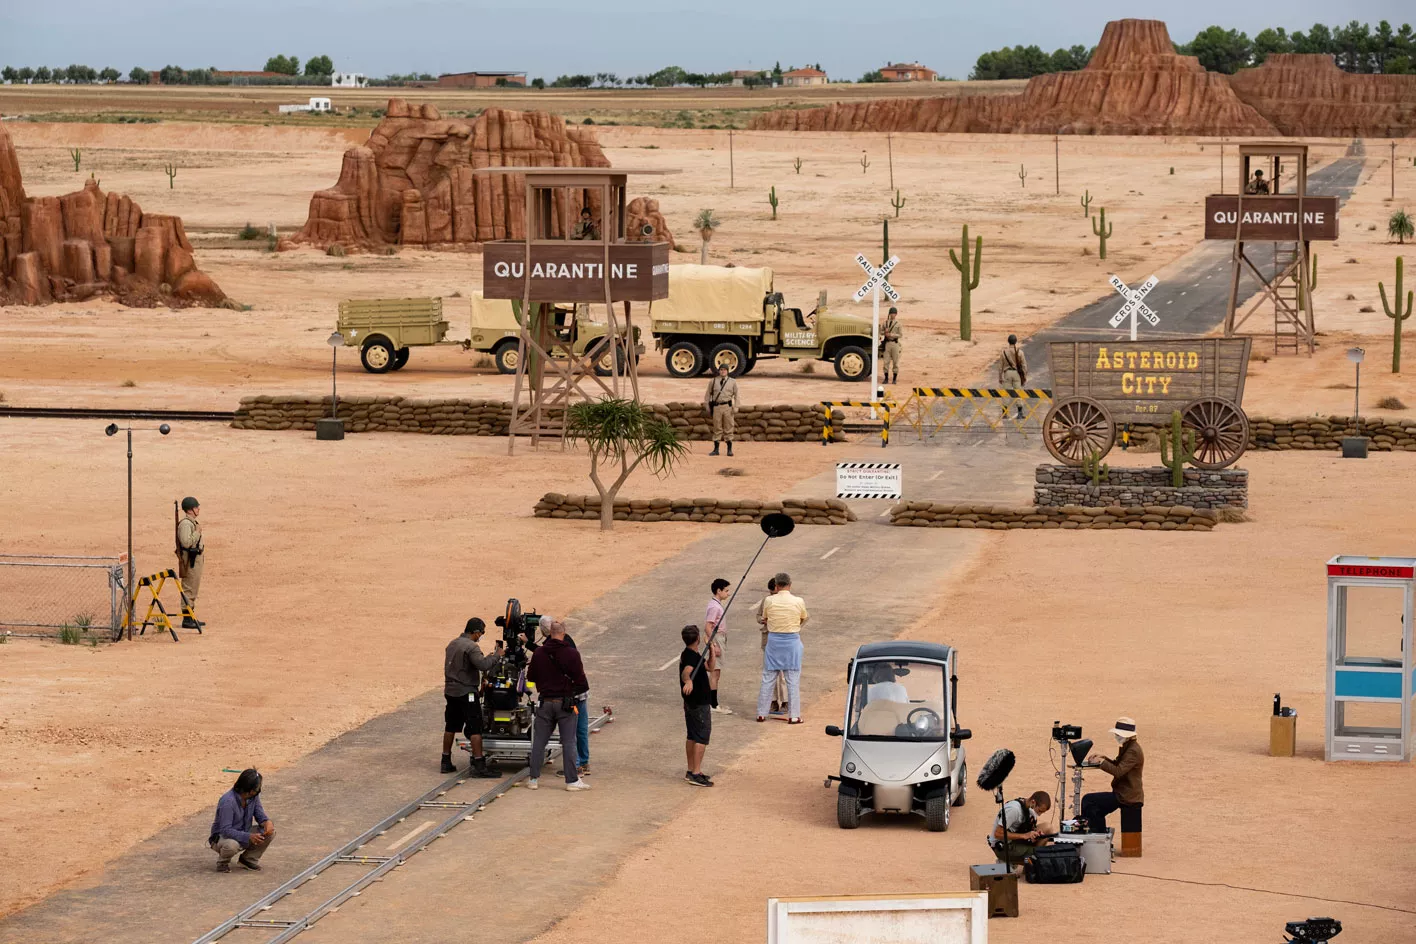 one of the sets of the movie Asteroid City, with cameras